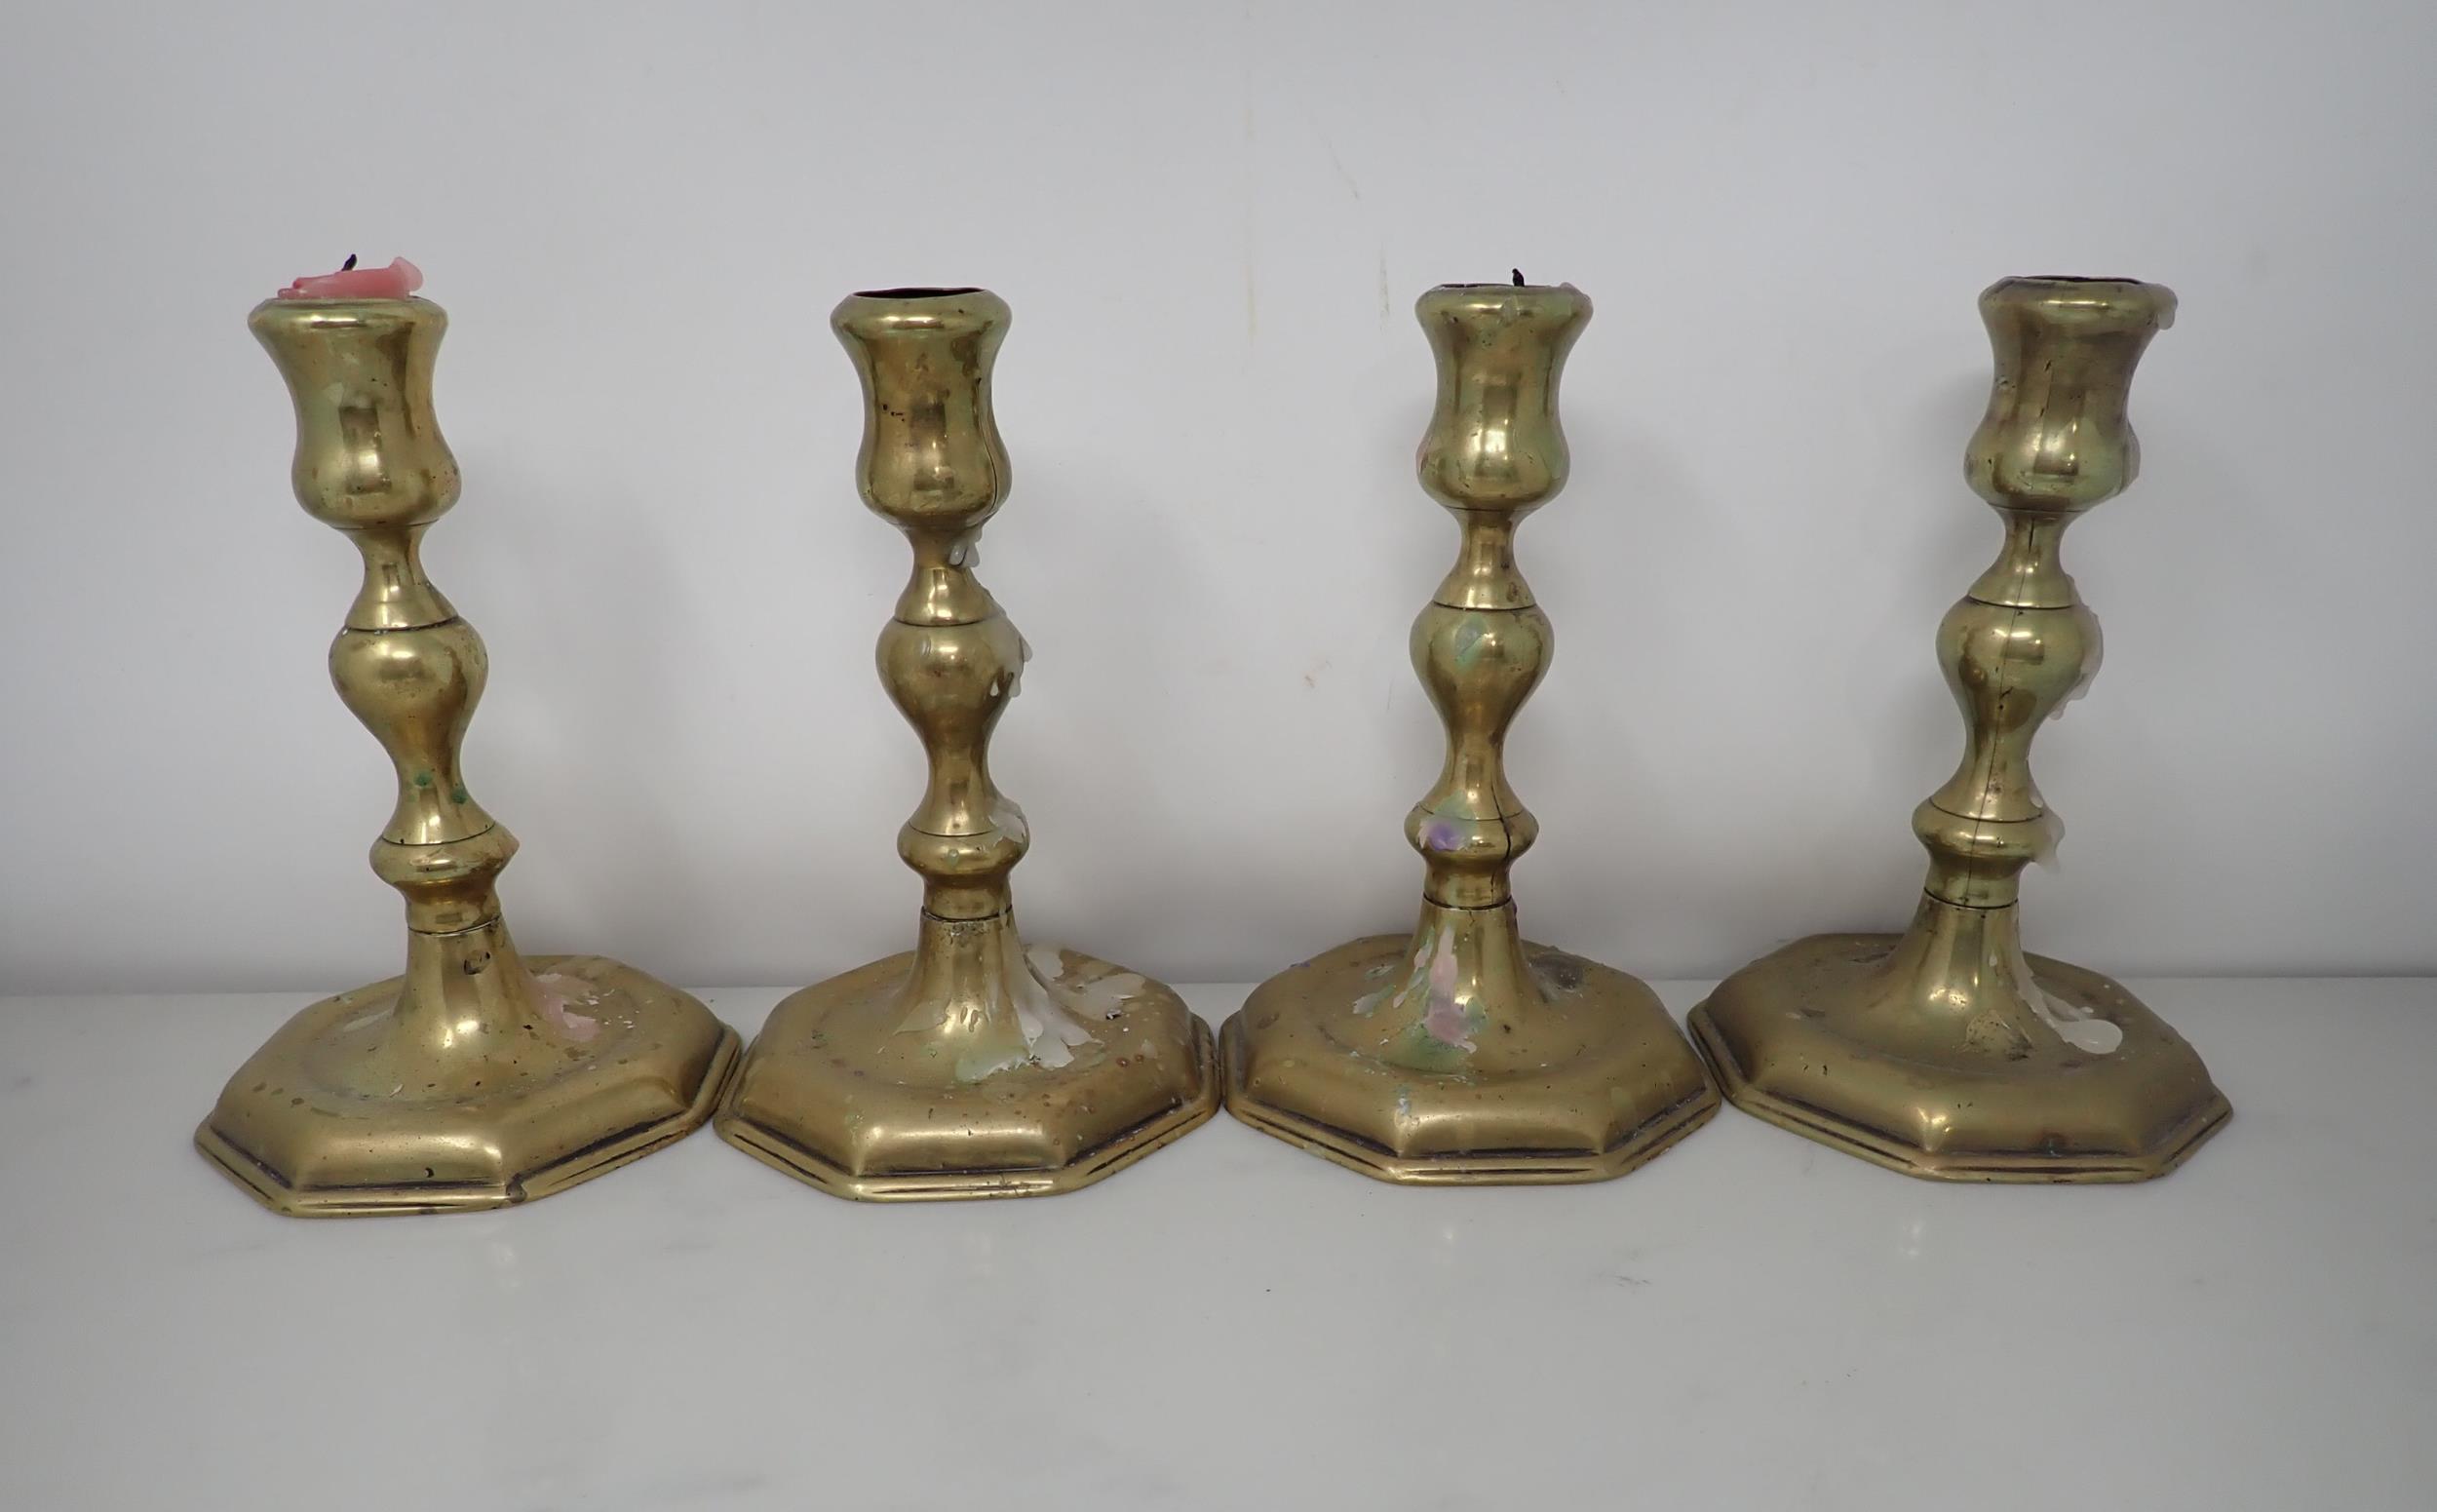 A set of four antique brass Candlesticks with baluster columns on octagonal bases, 6in